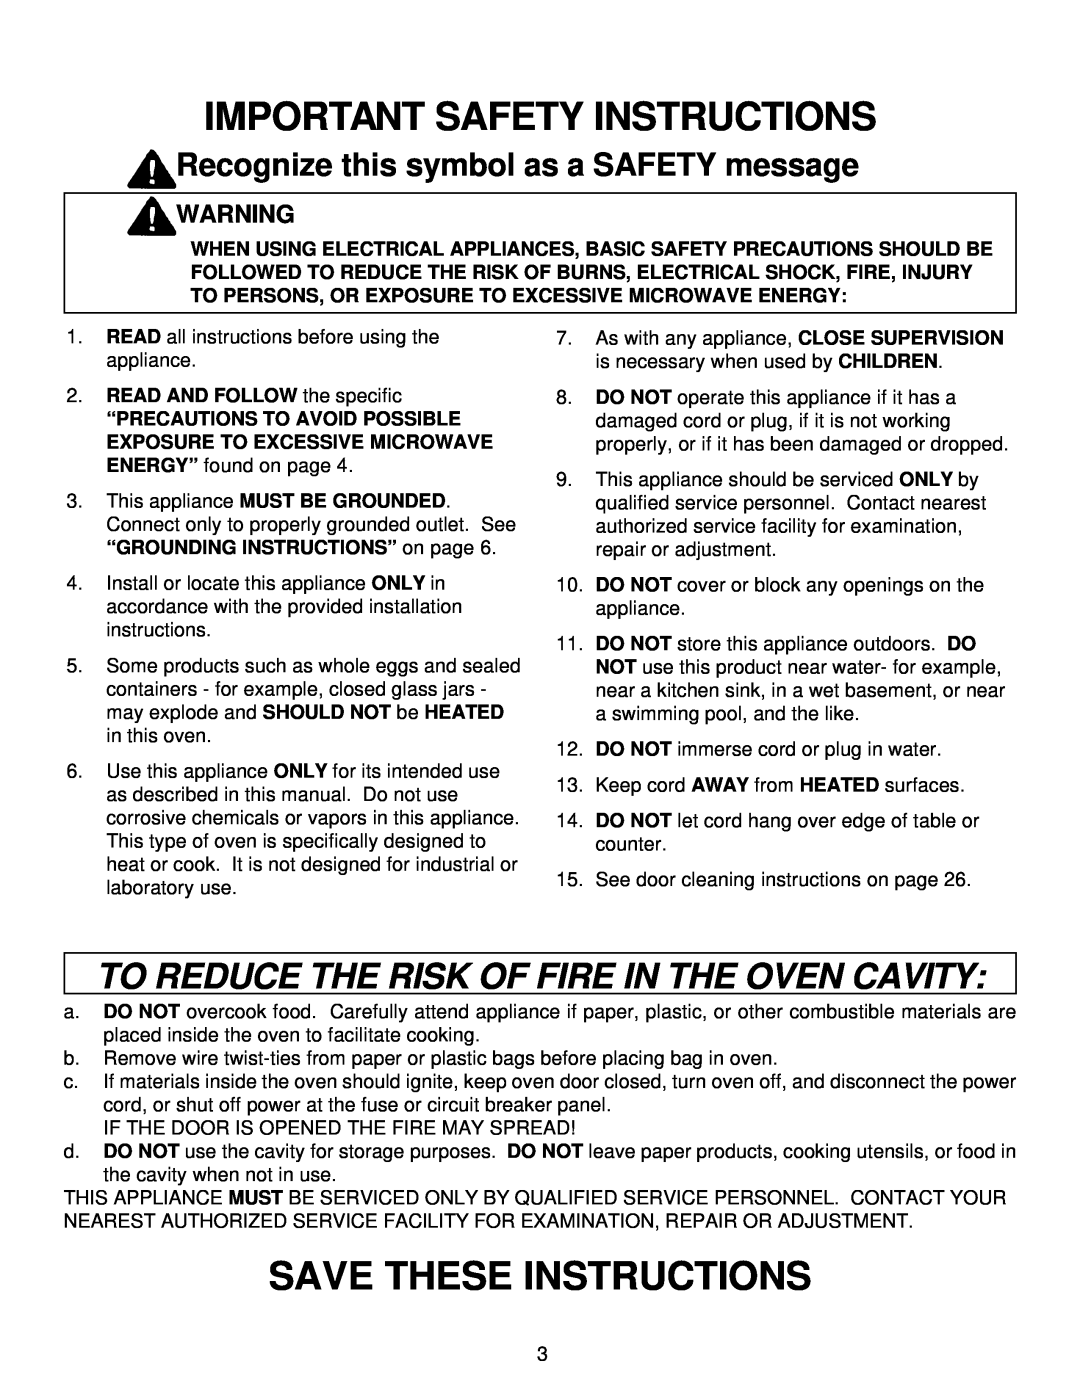 Amana FE116T, MW96T Important Safety Instructions, Save These Instructions, To Reduce The Risk Of Fire In The Oven Cavity 